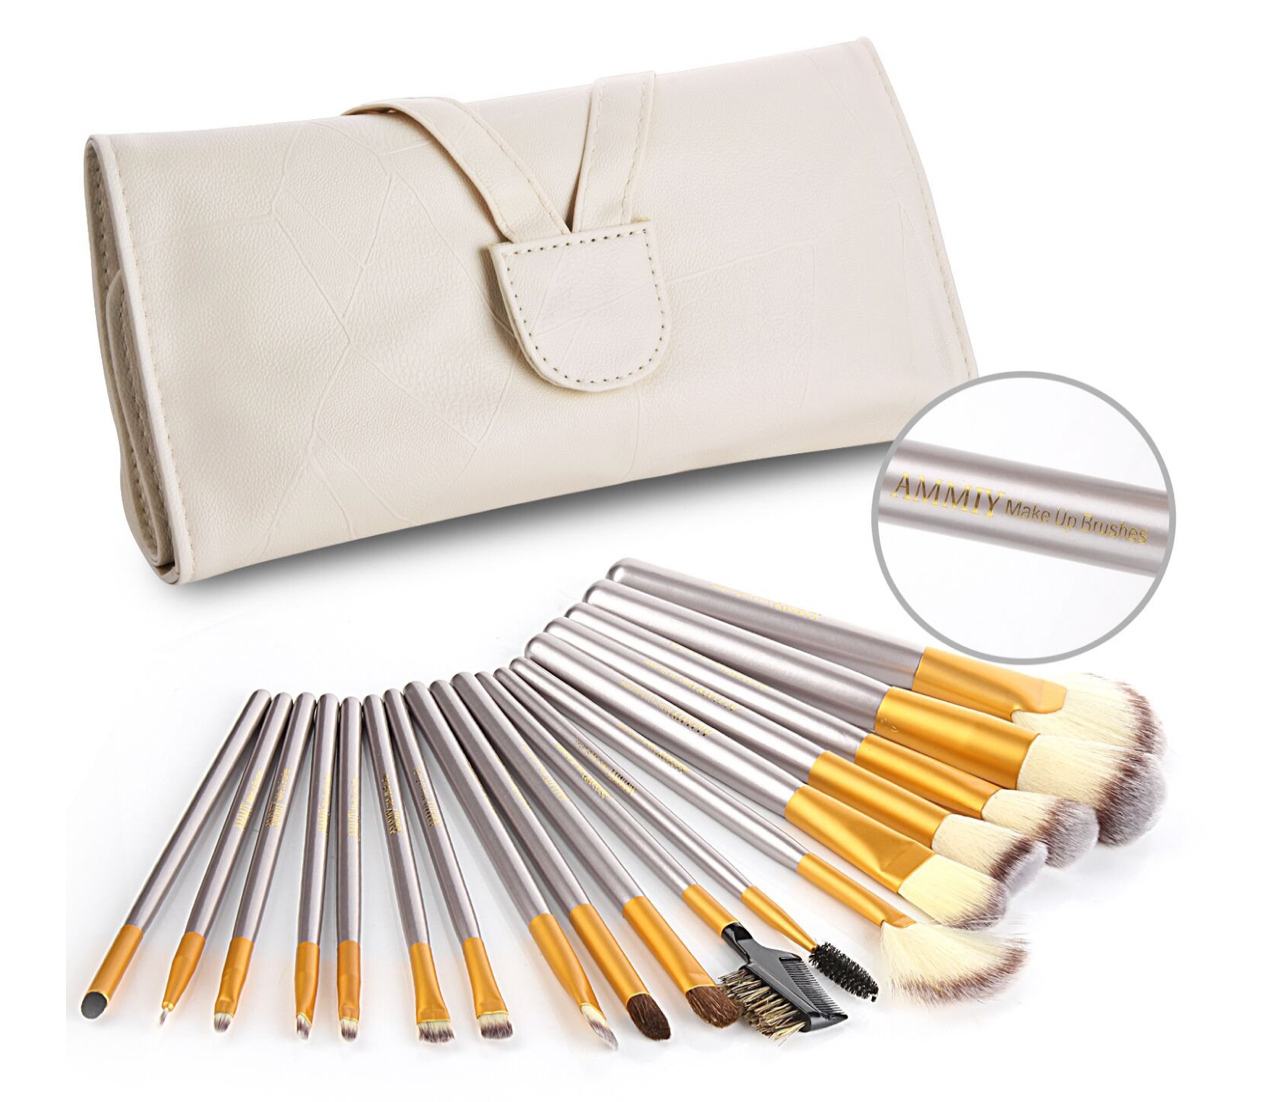 Compact Makeup Brush Collection - 18 Piece with Case